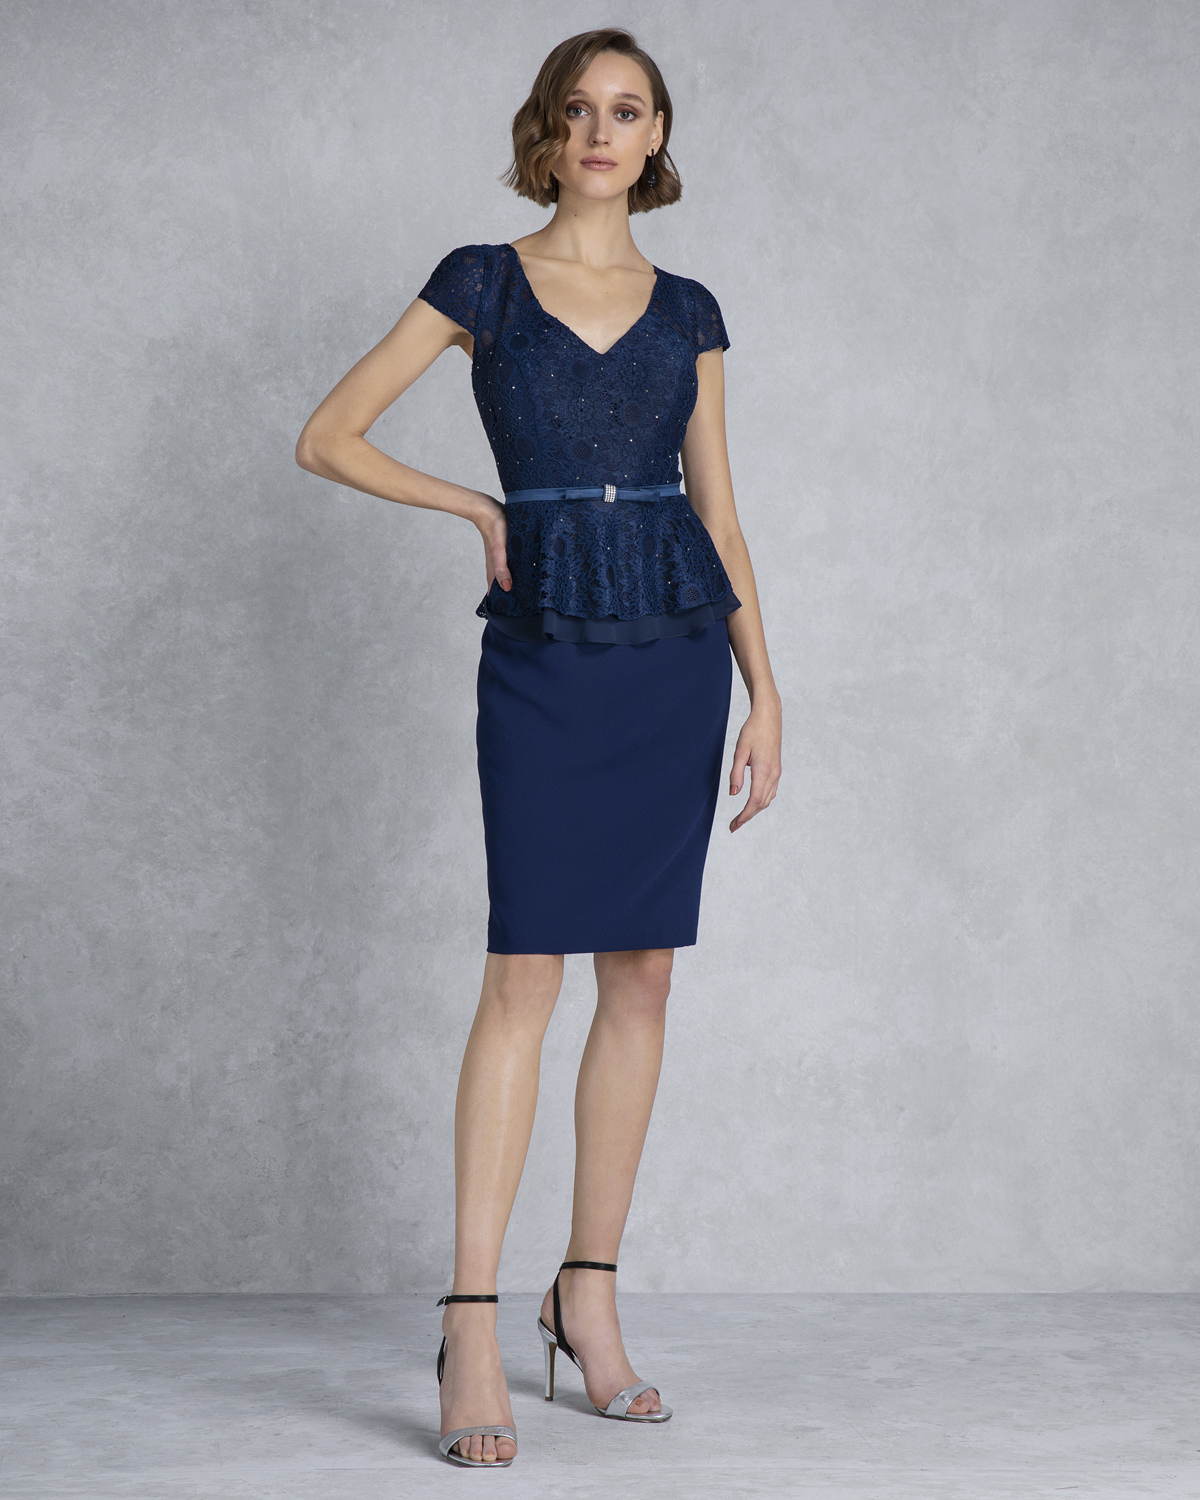 Classic Dresses / Mother of the bride lace dress with short sleeves